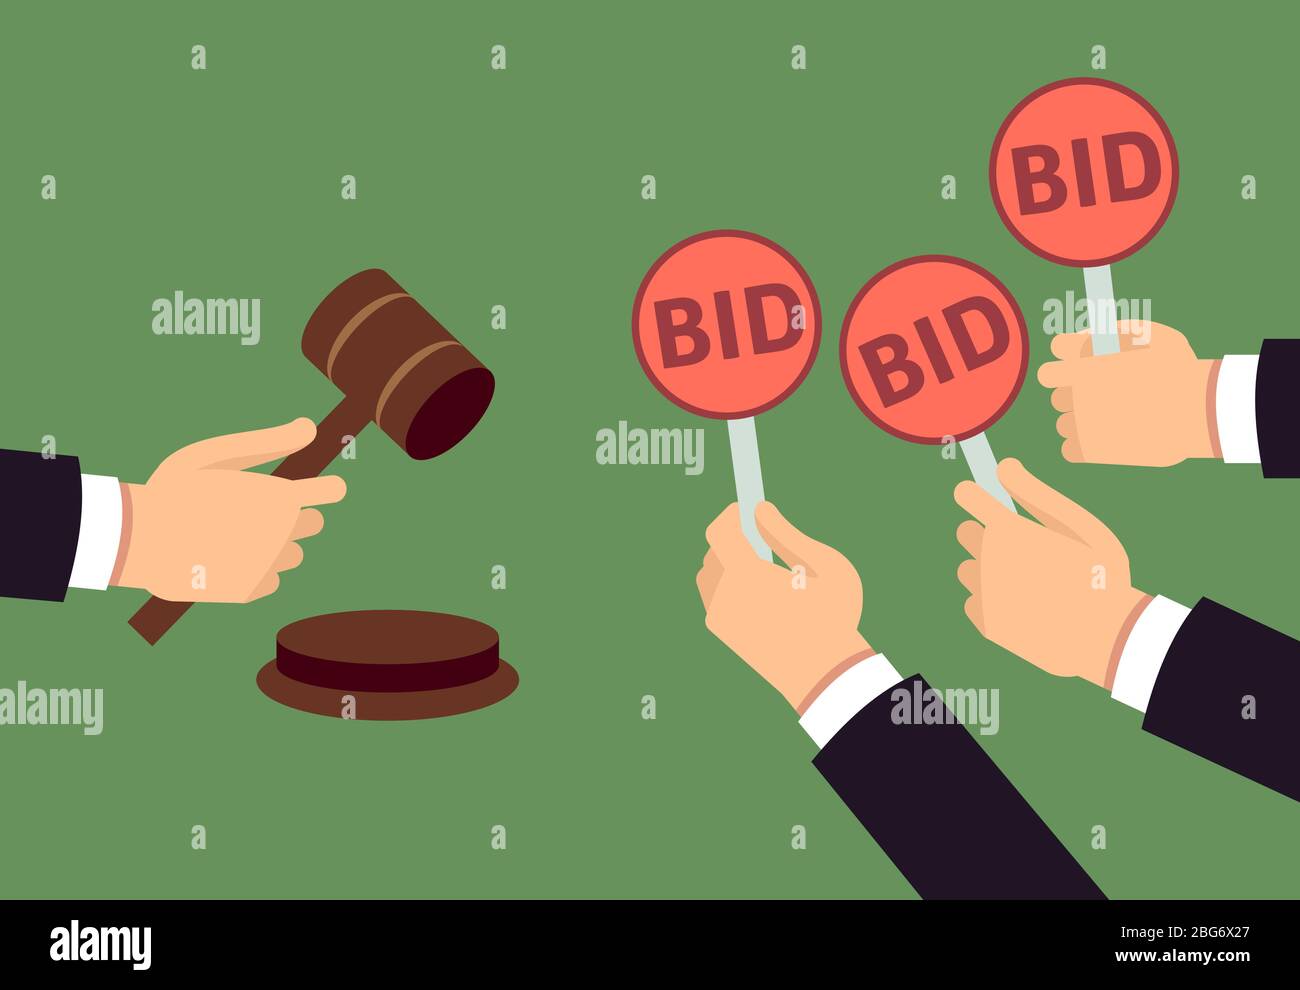 Bidders human arms holding bid paddle and auctioneer hand with gavel. Auction bidding and justice vector concept. Illustration of bidder on auction, h Stock Vector